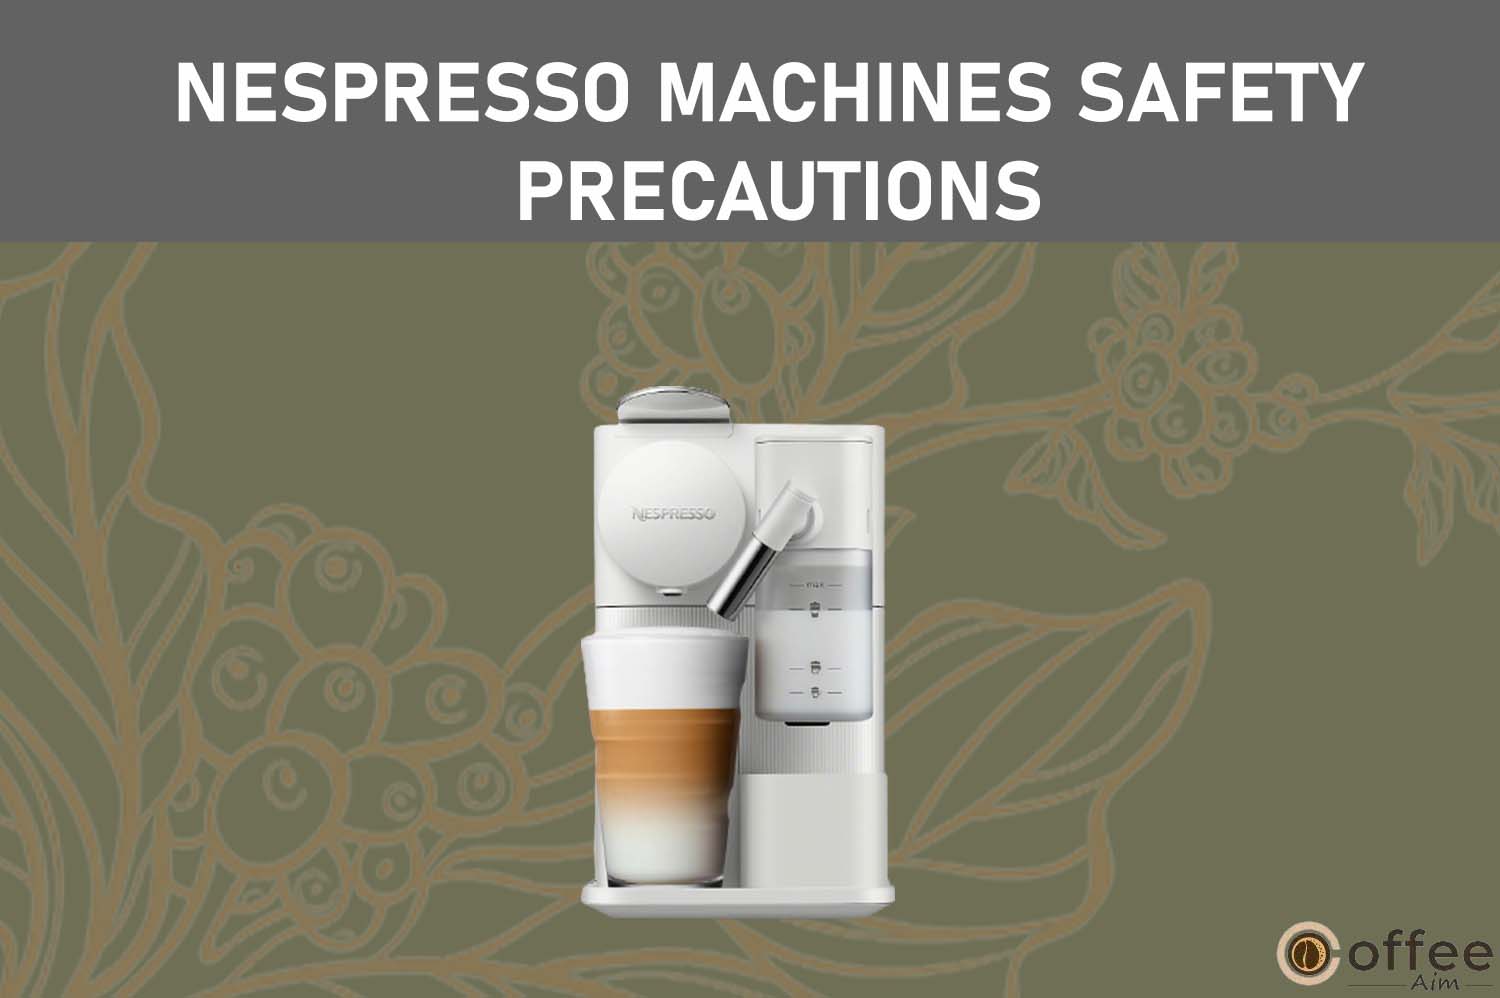 Feature image for the article "Nespresso Machines Safety Precautions"